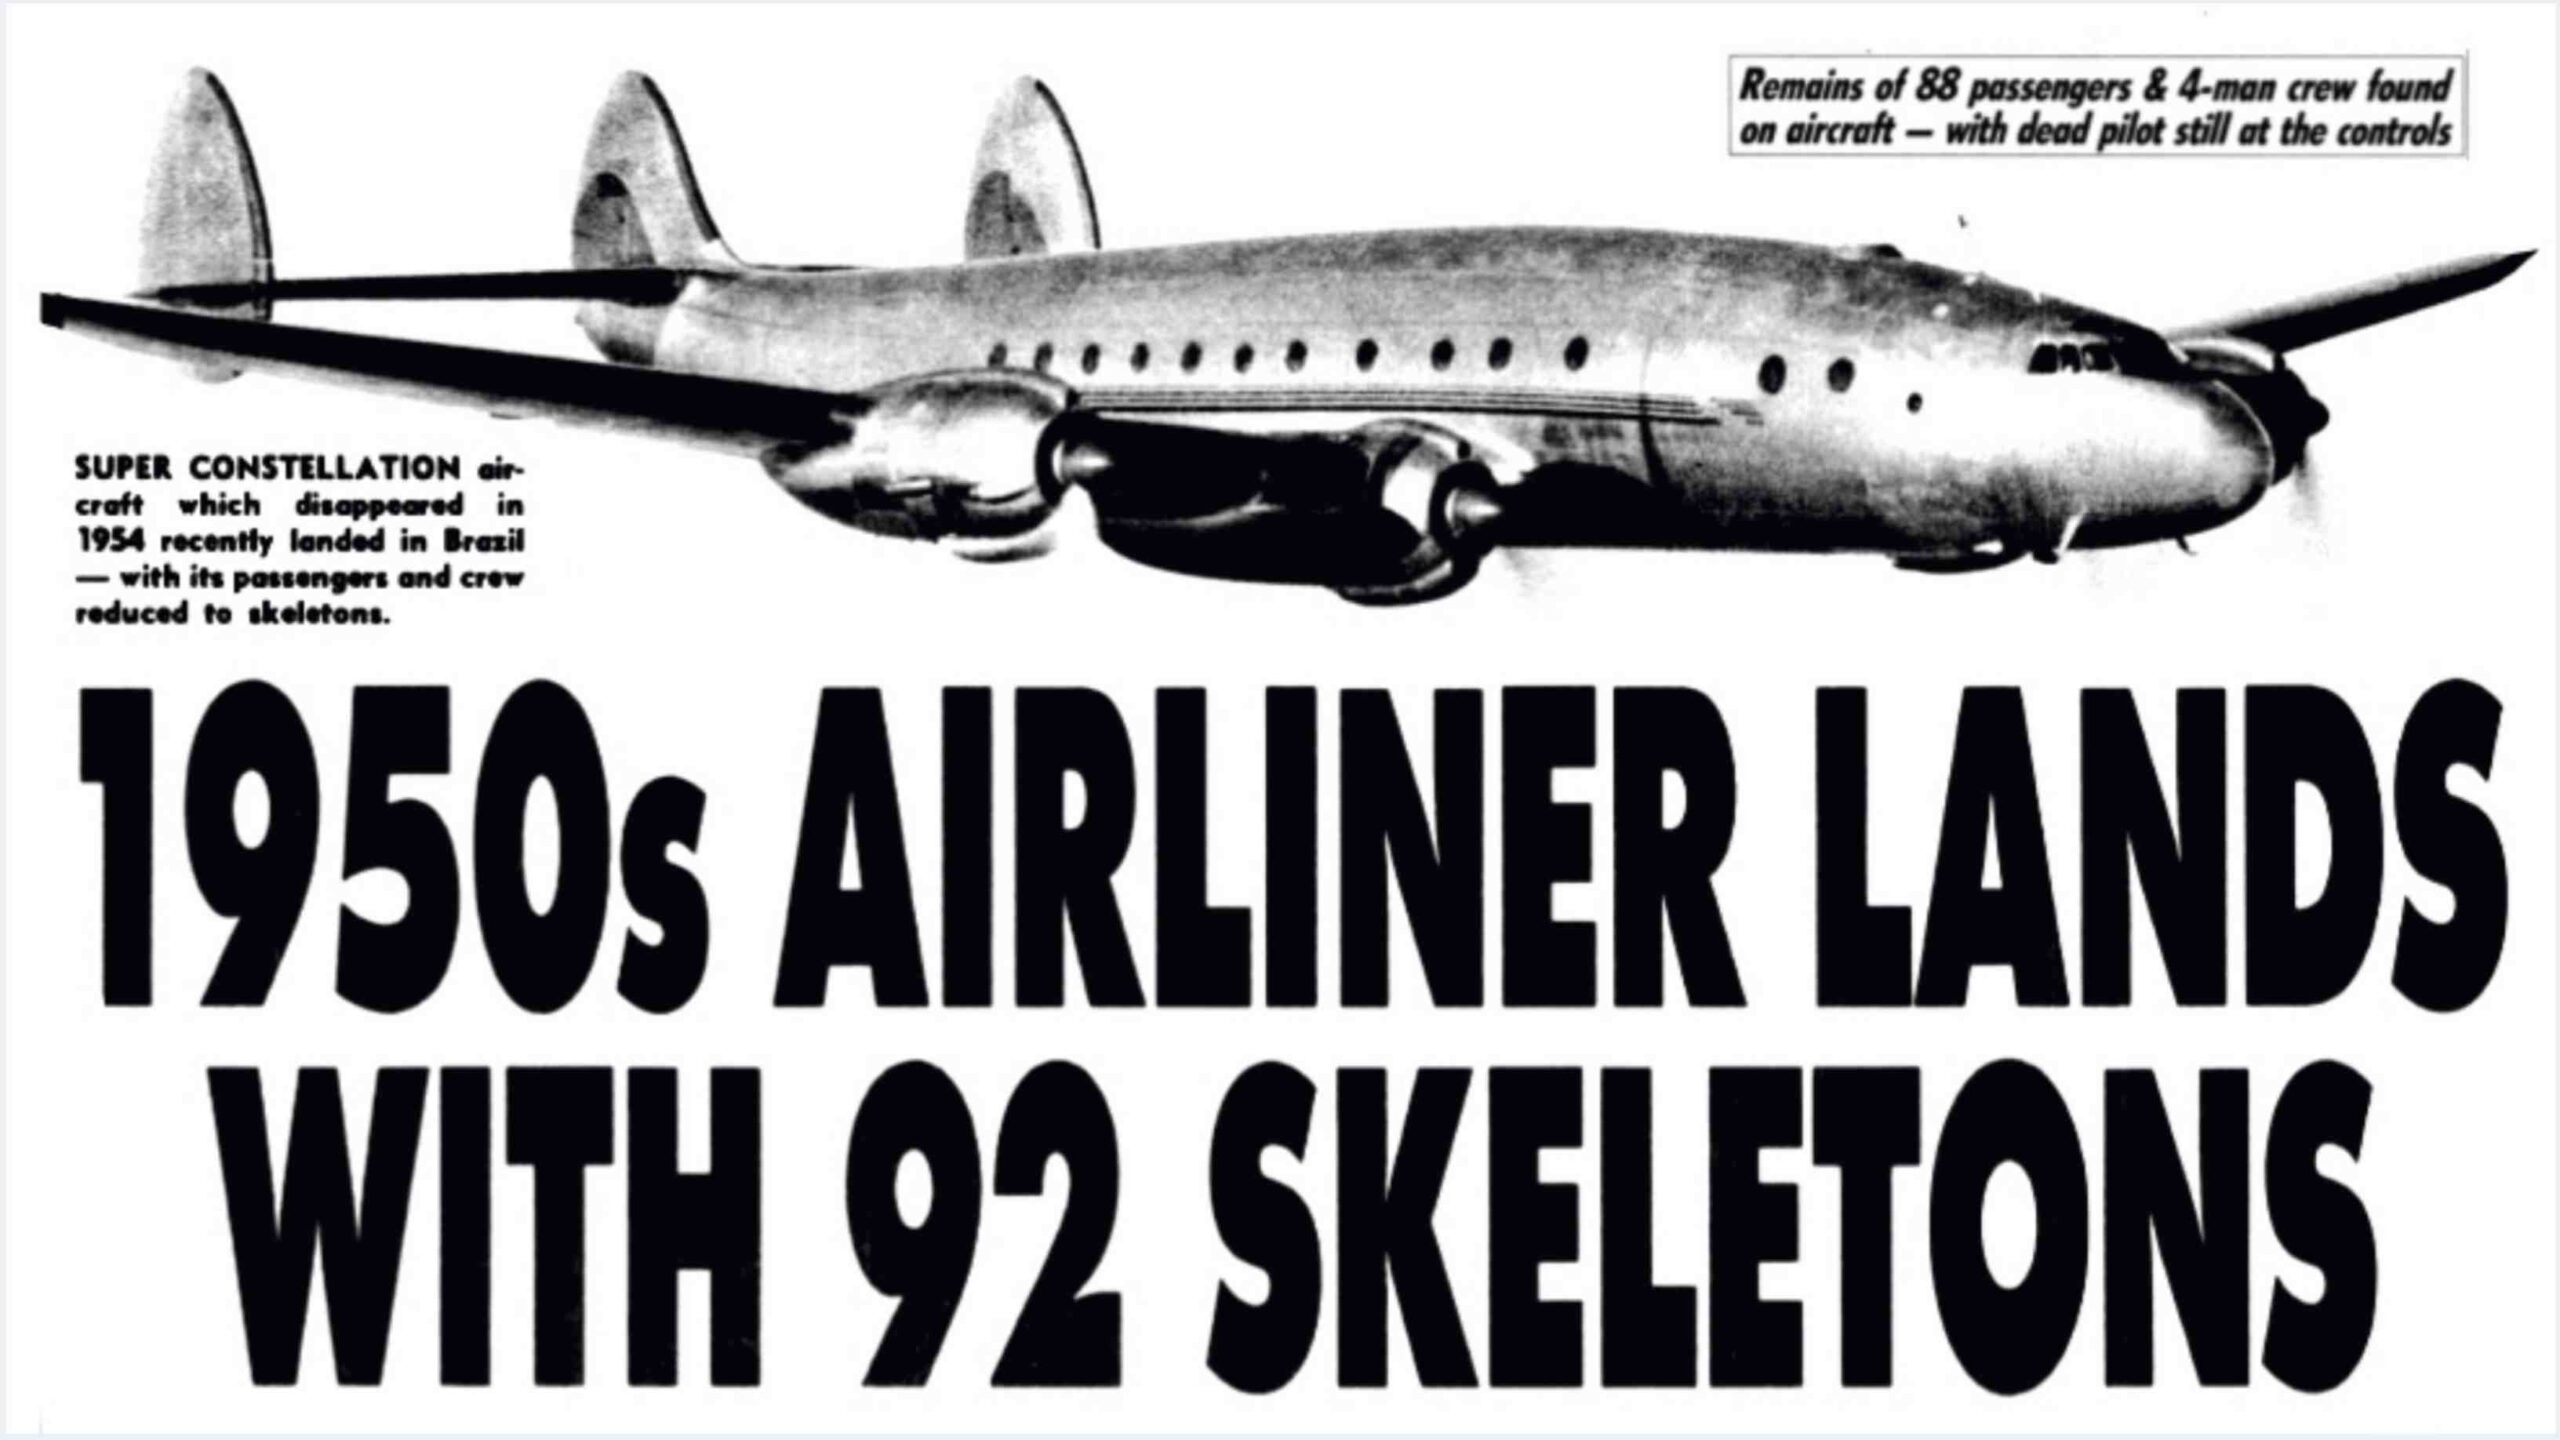 Santiago flight 513: The plane, lost for 35 years, landed with 92 skeletons on board! 1